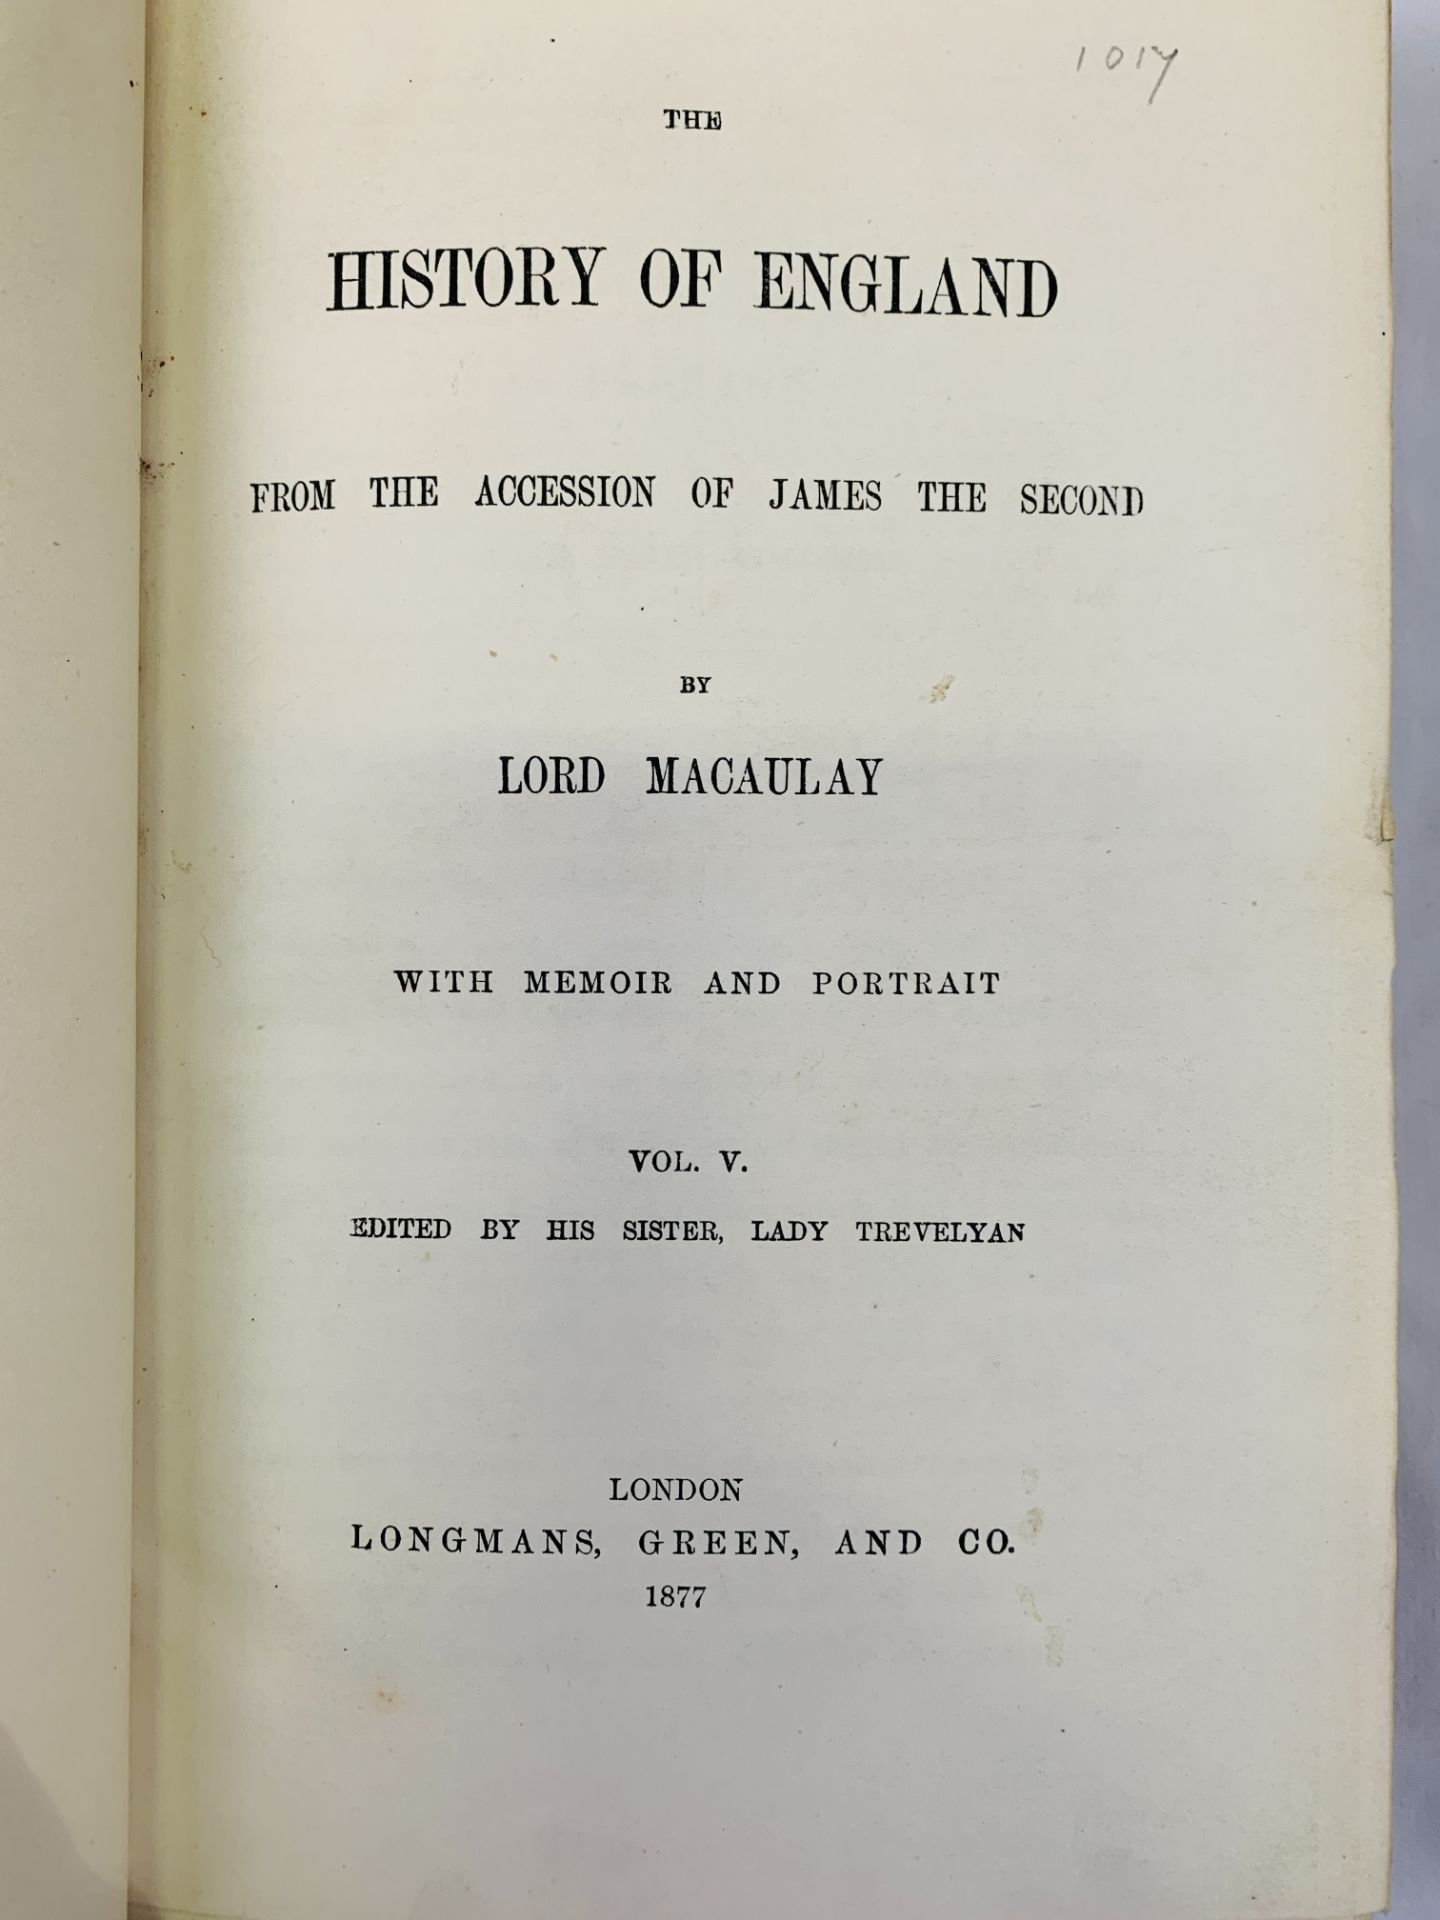 The History of England by Lord Macaulay - Image 2 of 4